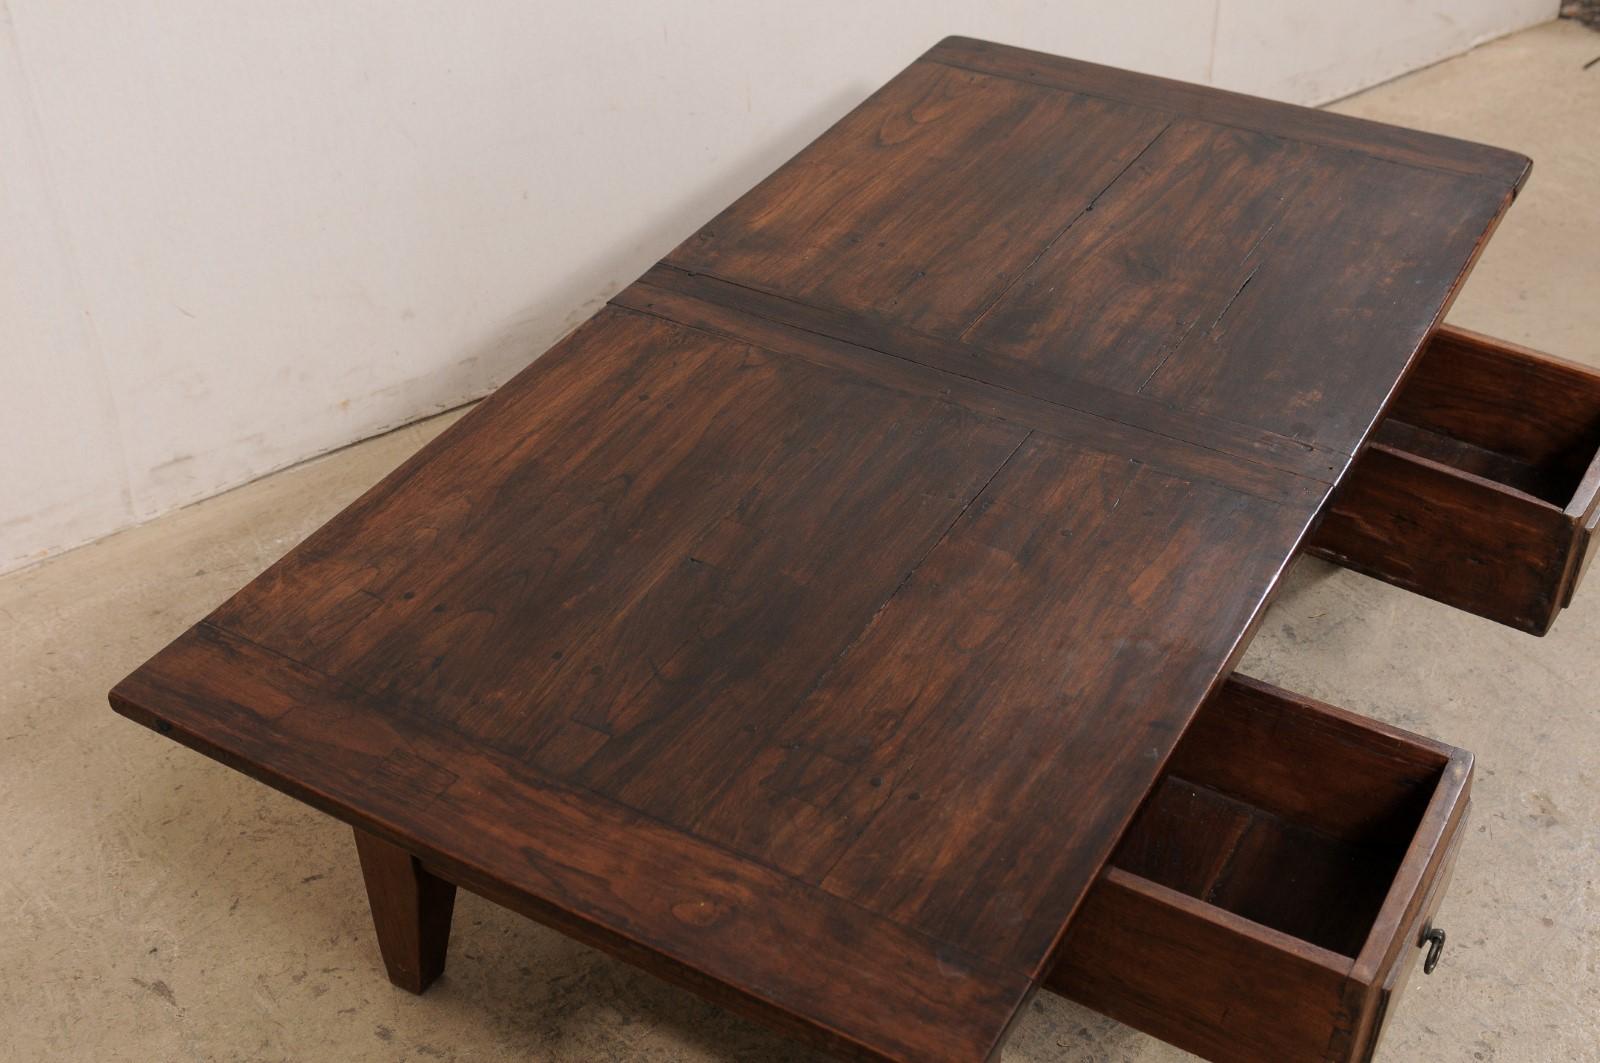 French Fruitwood Coffee Table in Rectangular-Shape w/Storage, Early 20th Century For Sale 2